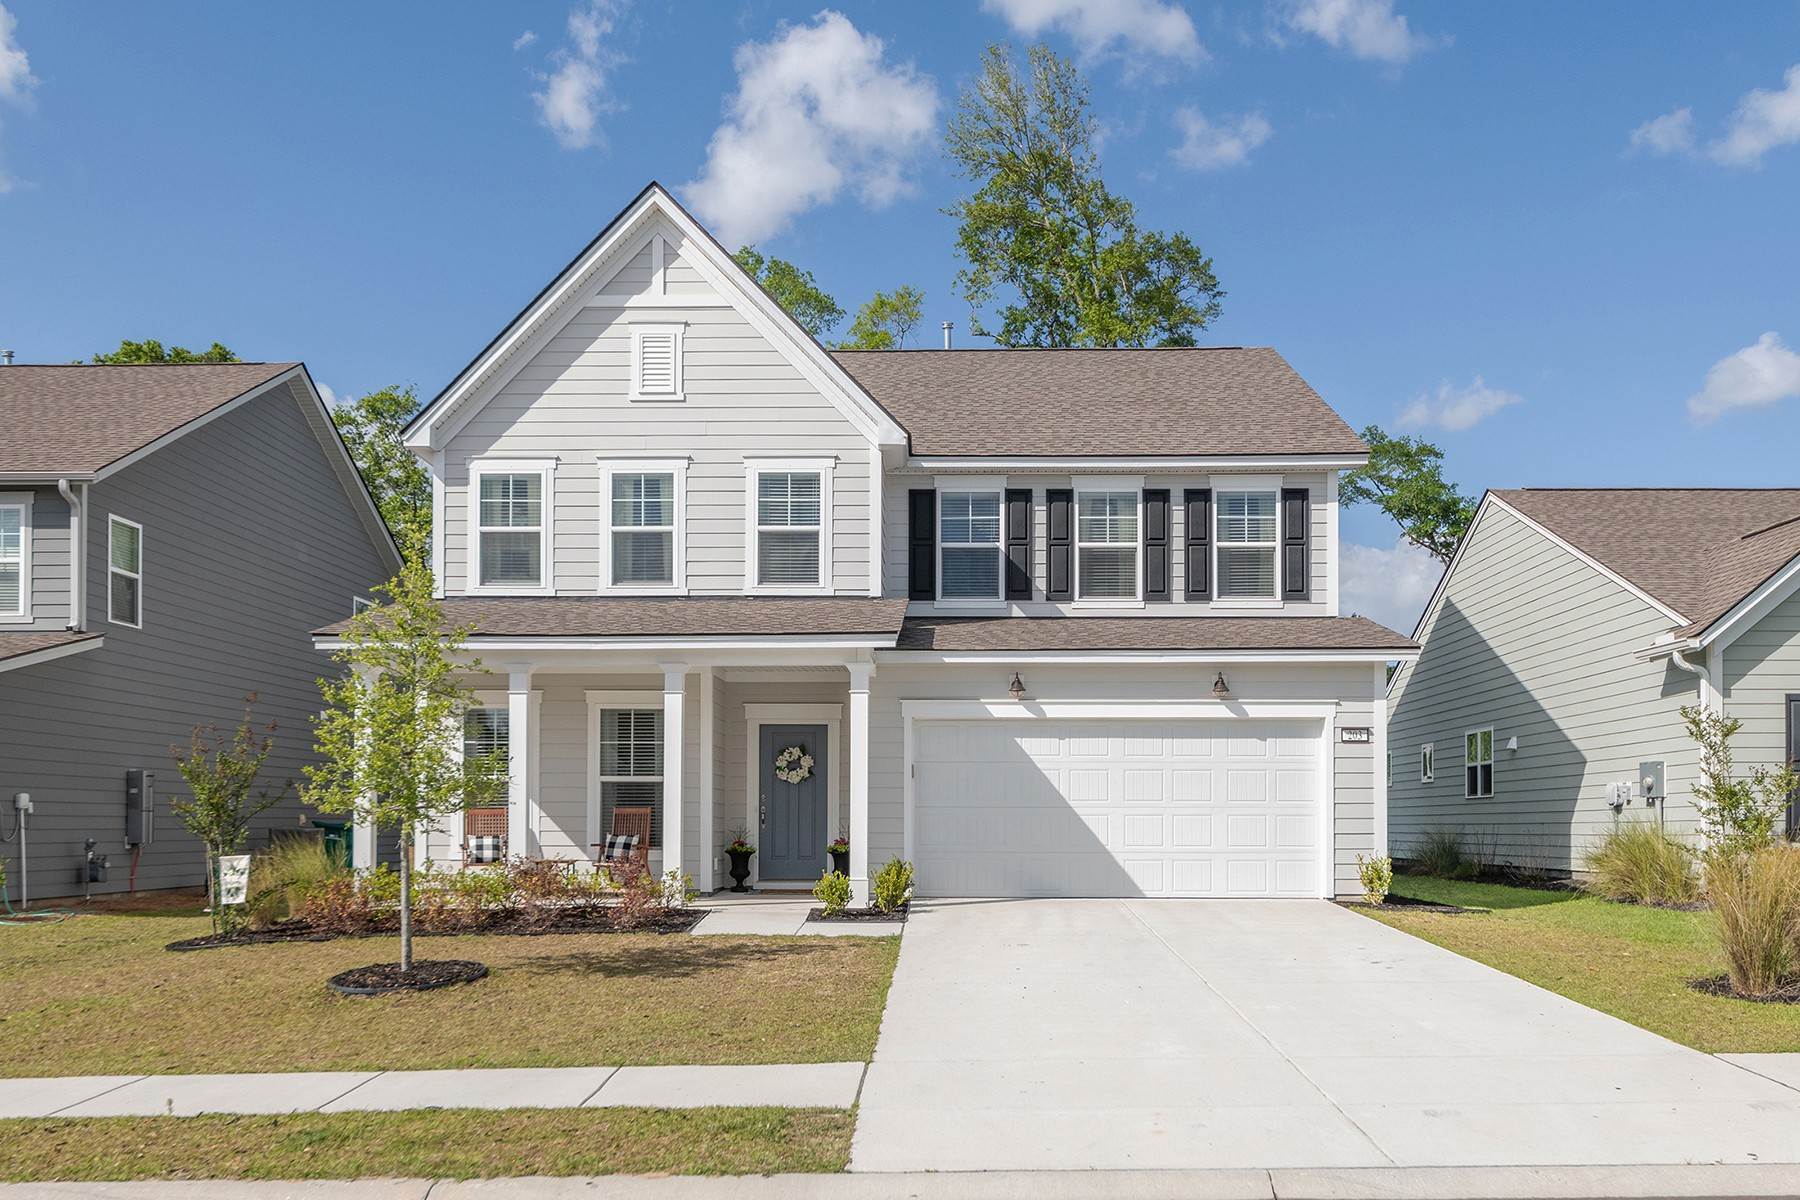 3. Single Family Homes for Sale at Classic Lowcountry Style At The Landings At New Riverside 203 Rudder Run Bluffton, South Carolina 29910 United States